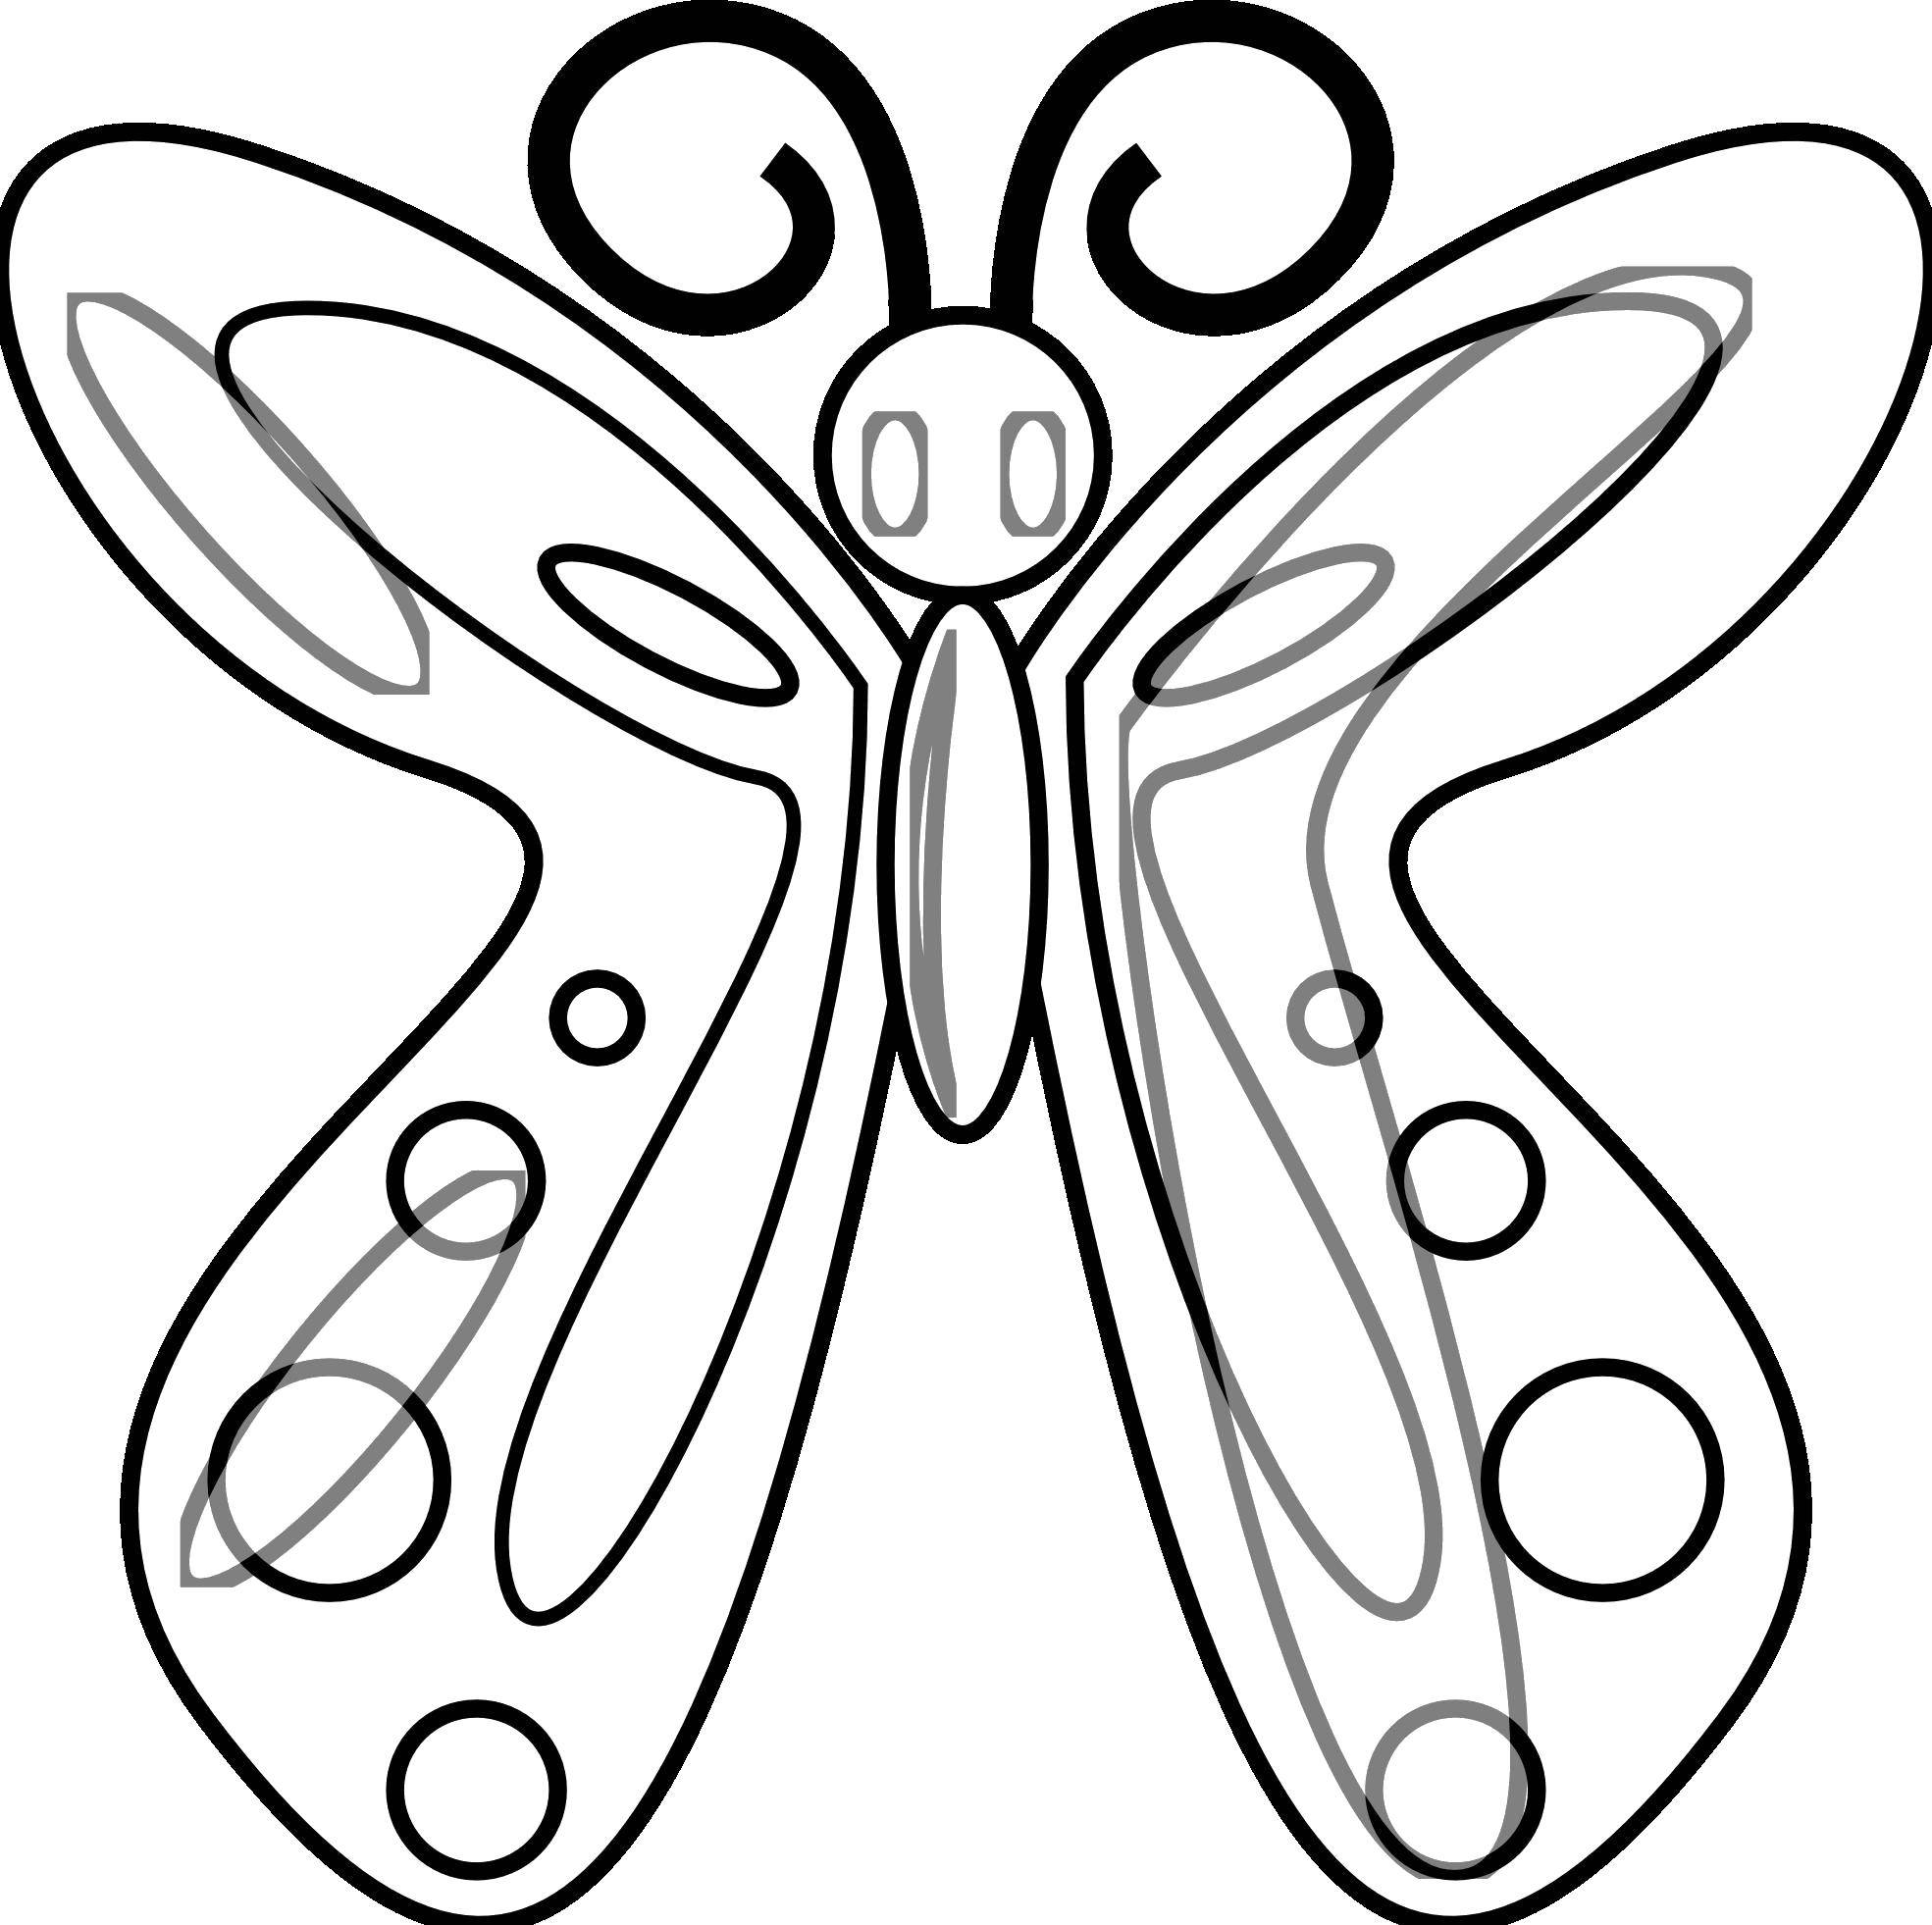 Coloring Funny butterfly. Category the contours for cutting out butterflies. Tags:  Butterfly.